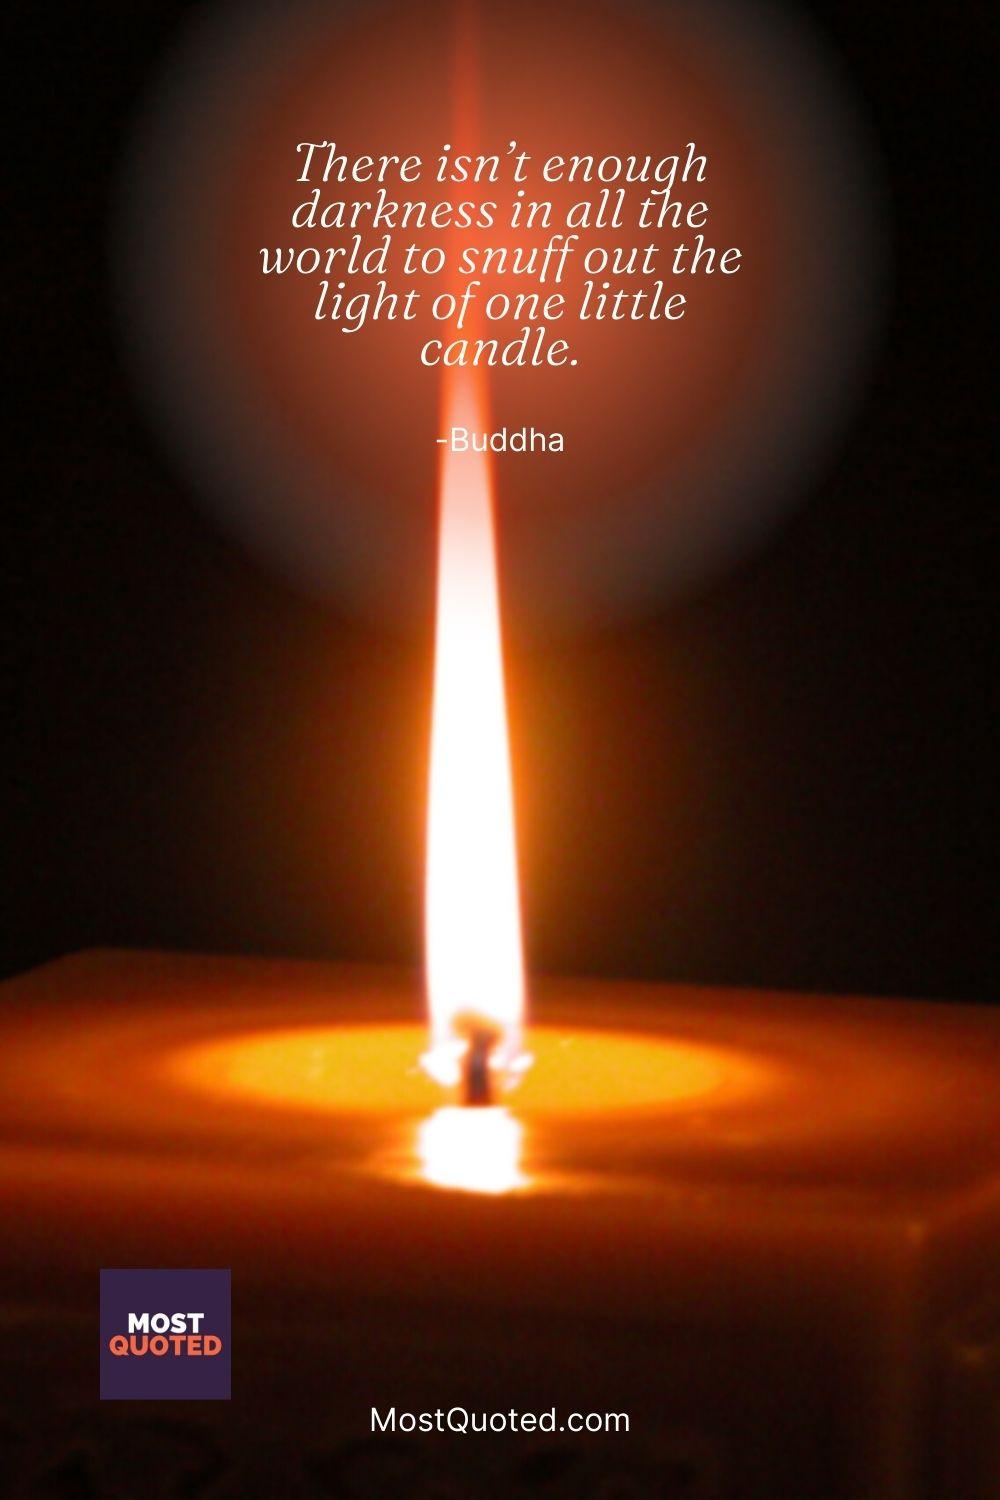 There isn’t enough darkness in all the world to snuff out the light of one little candle. - Buddha